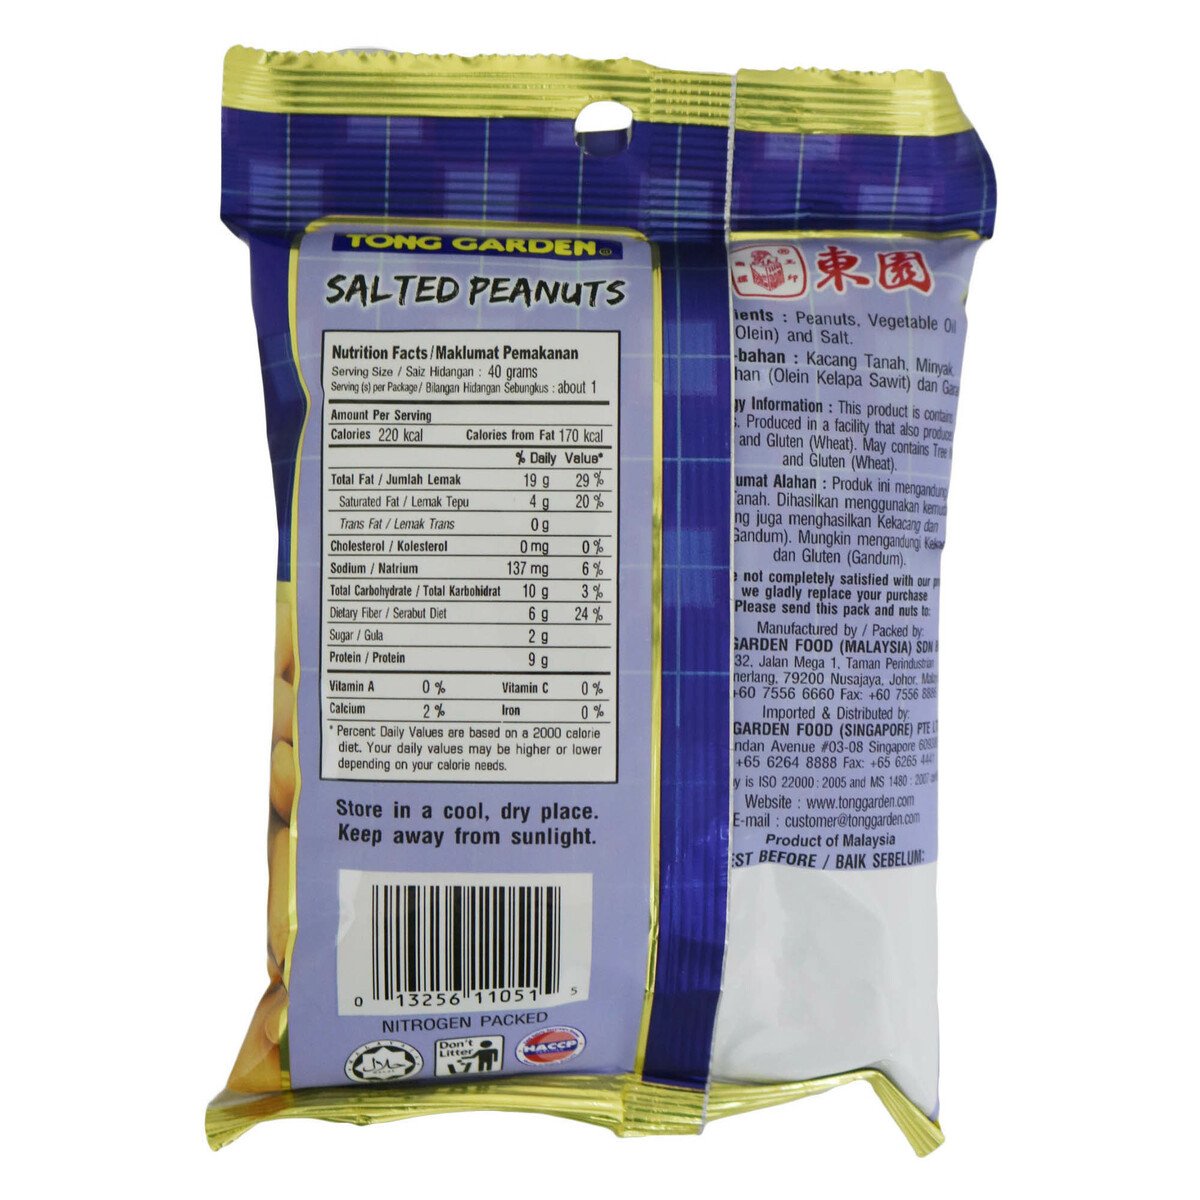 Tong Garden Salted Peanuts 42g